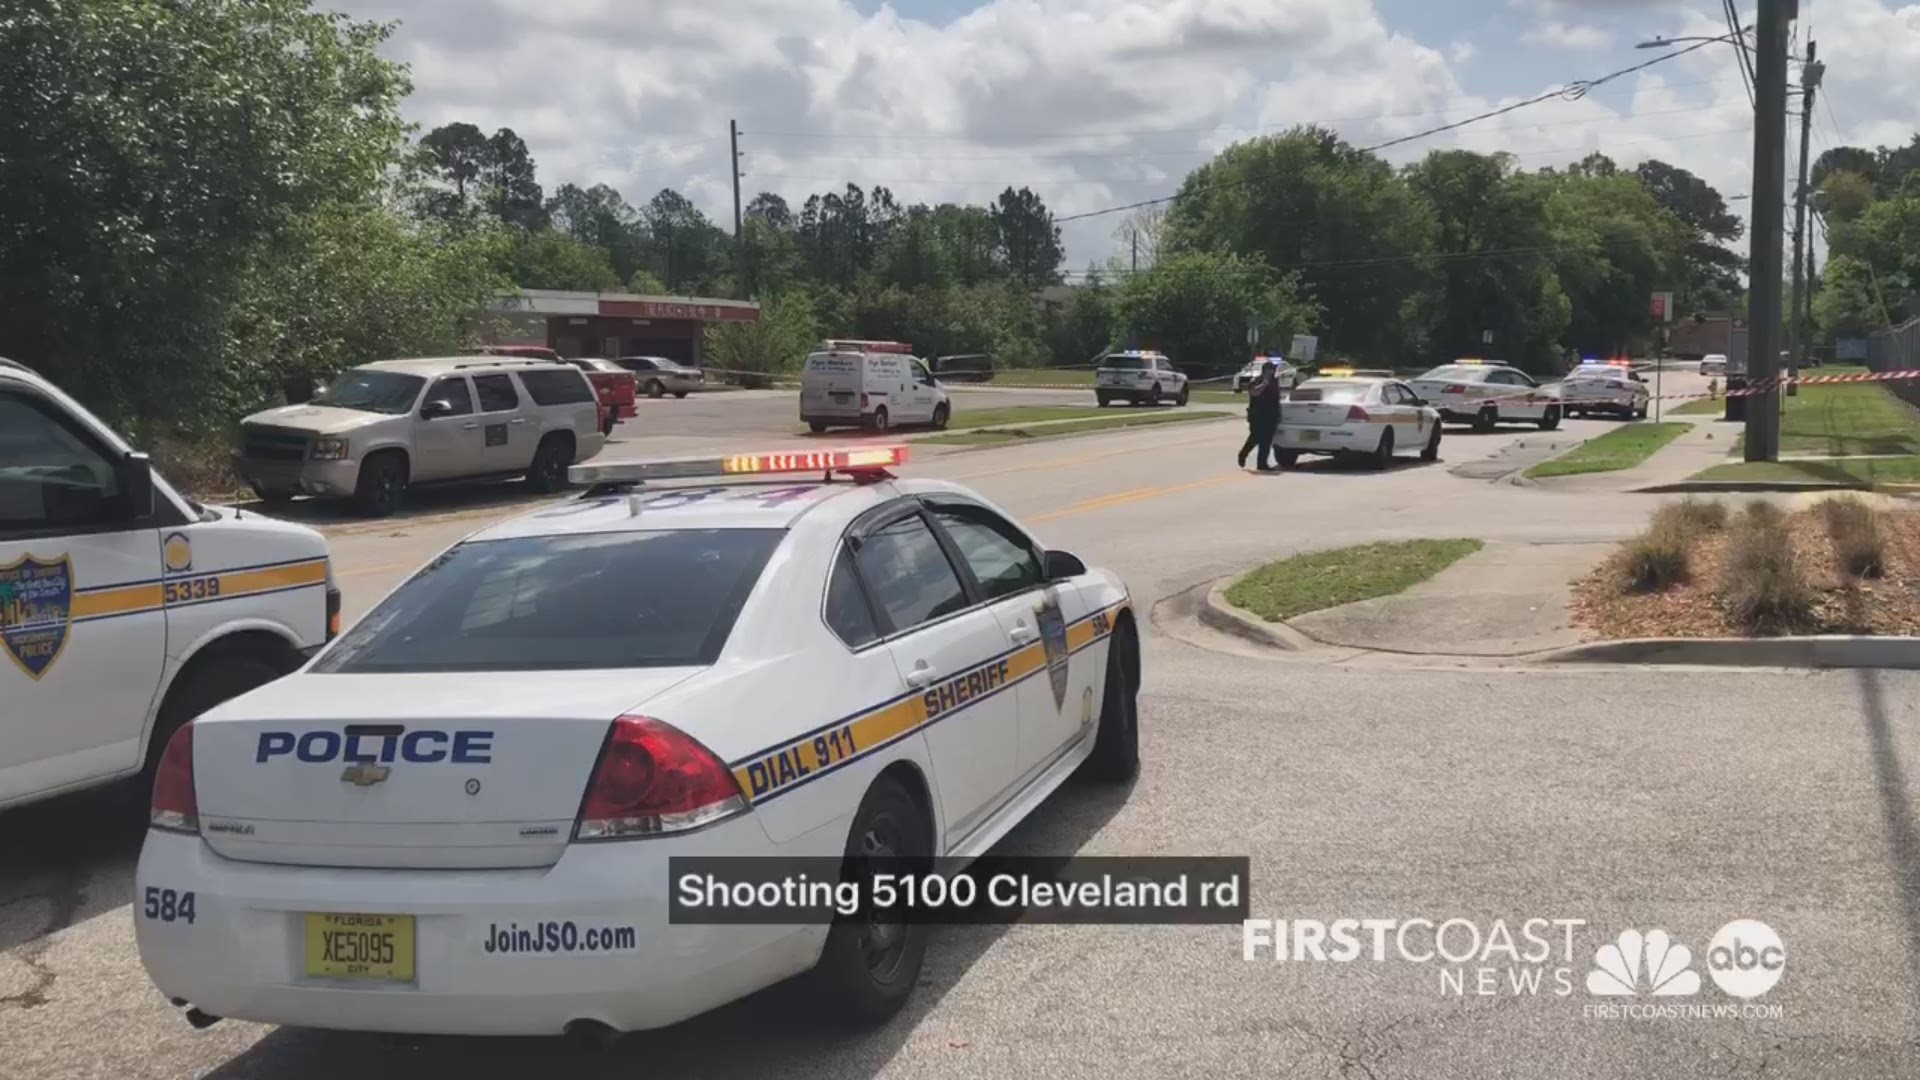 The shooting happened in the 5000 block of Cleveland Road, police said.